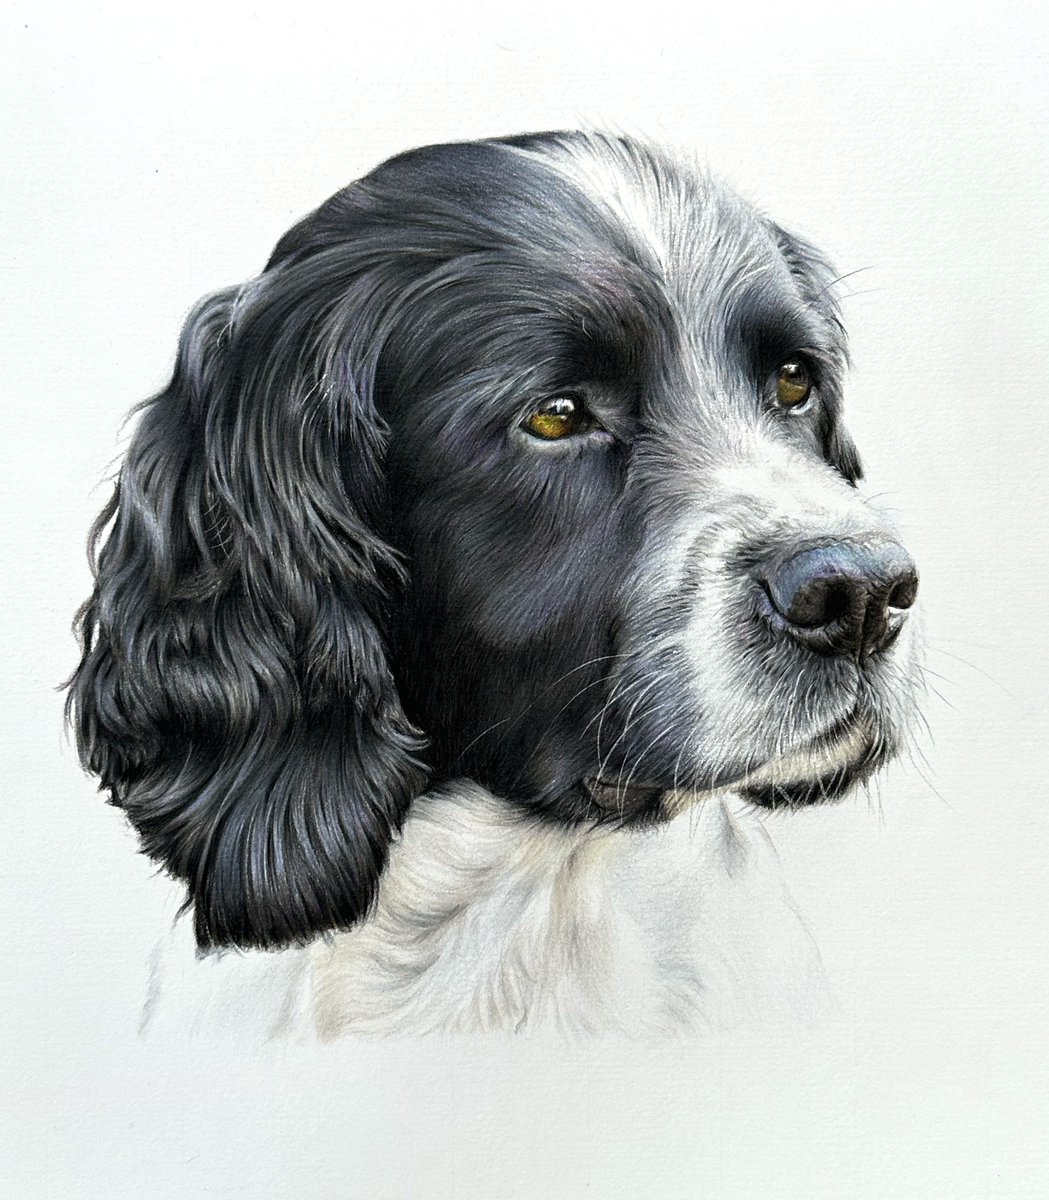 ‘Basil’ I knew from the moment I saw Basil’s photo that this would be a wonderful portrait and it really has been a joy from start to finish. I hope you all like him as much as I do 💛